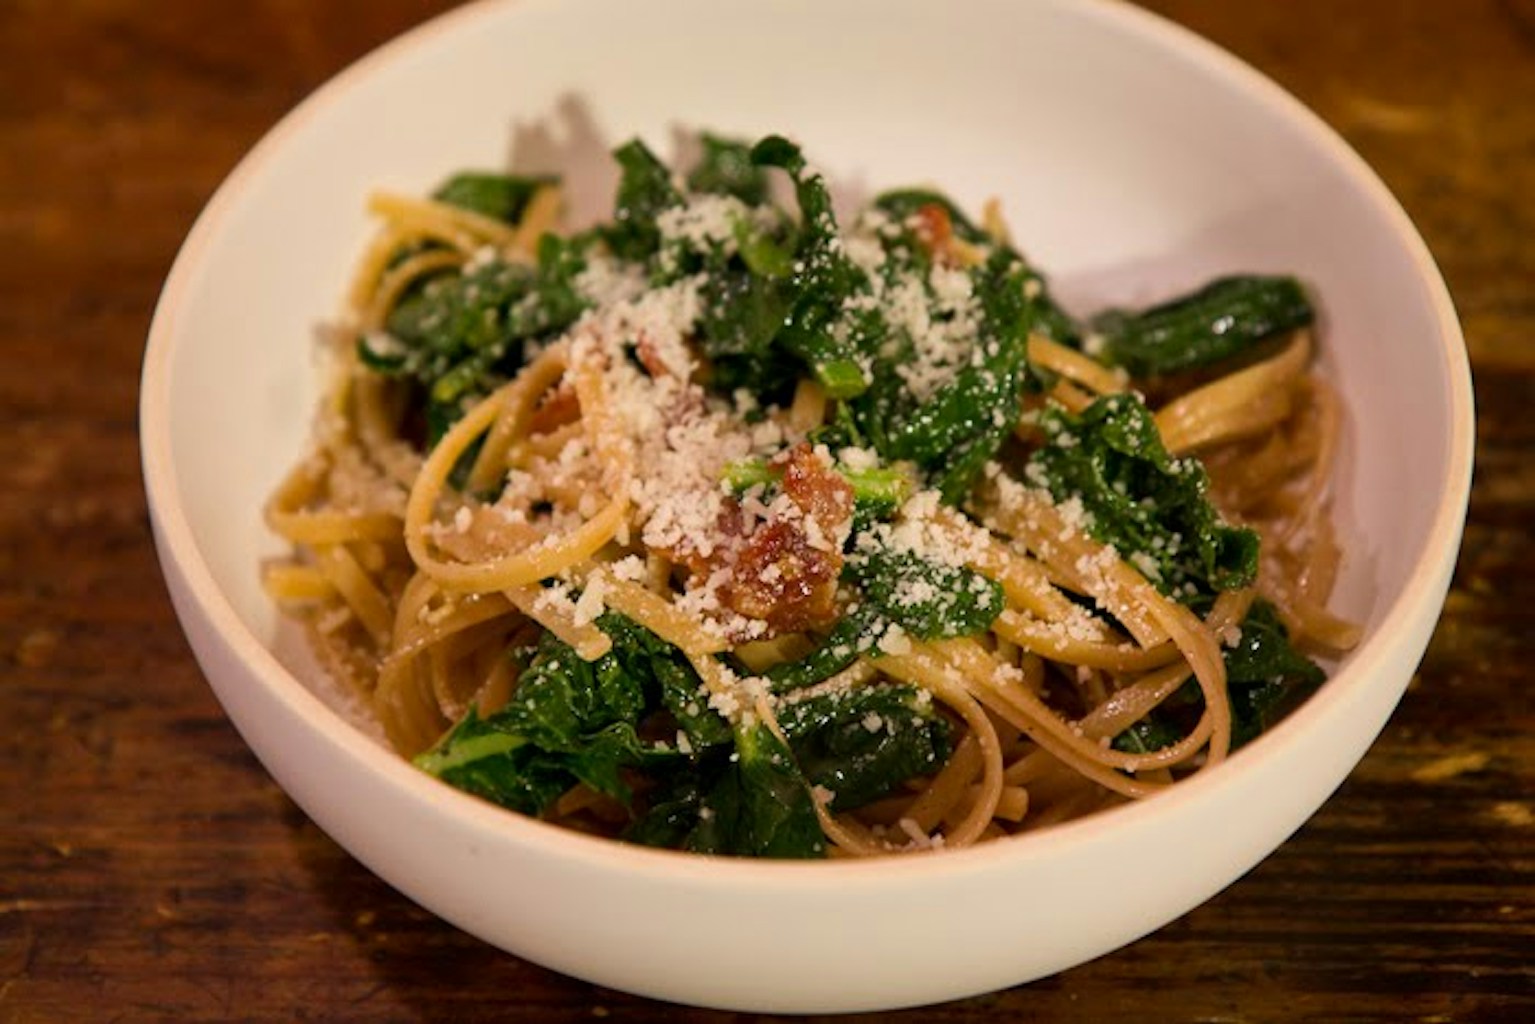 Spaghetti Carbonara with Garlicky Greens - The Yellow Table